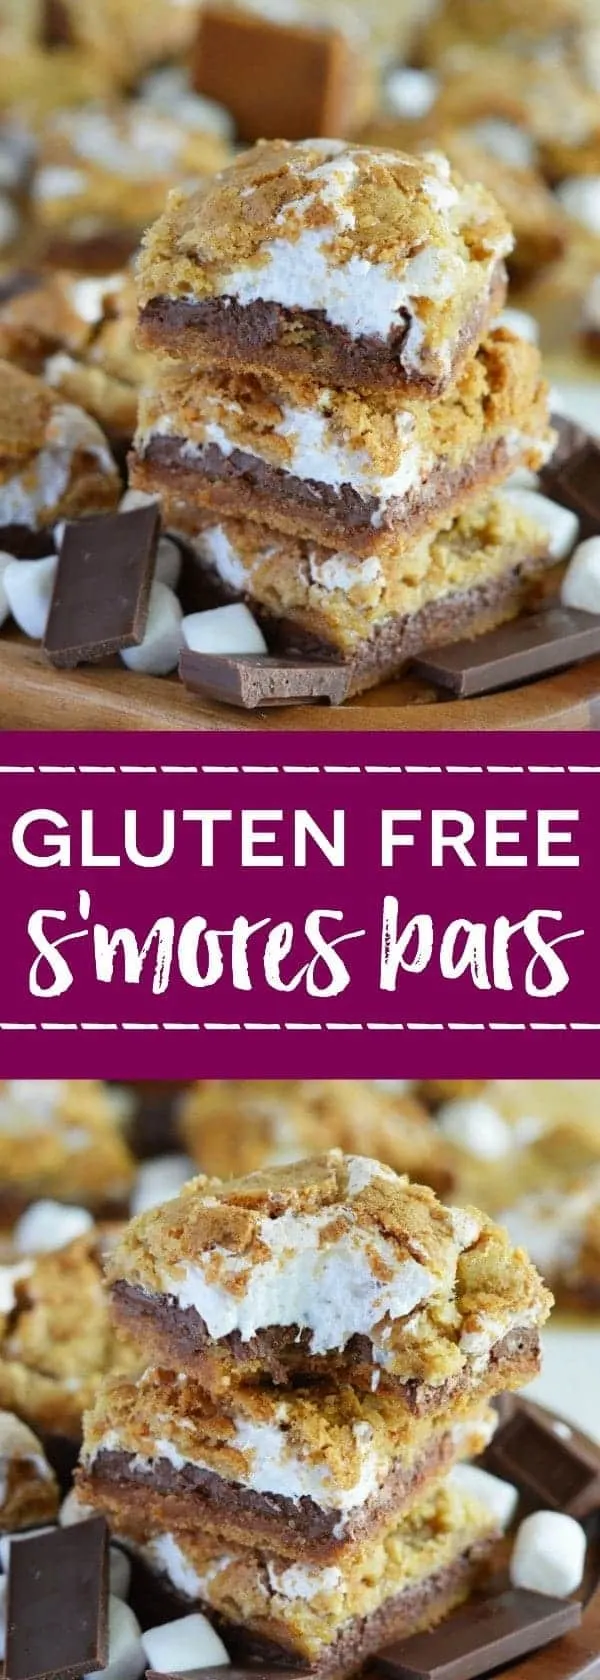 Gluten free s'mores bars (with dairy free option) collage image for Pinterest